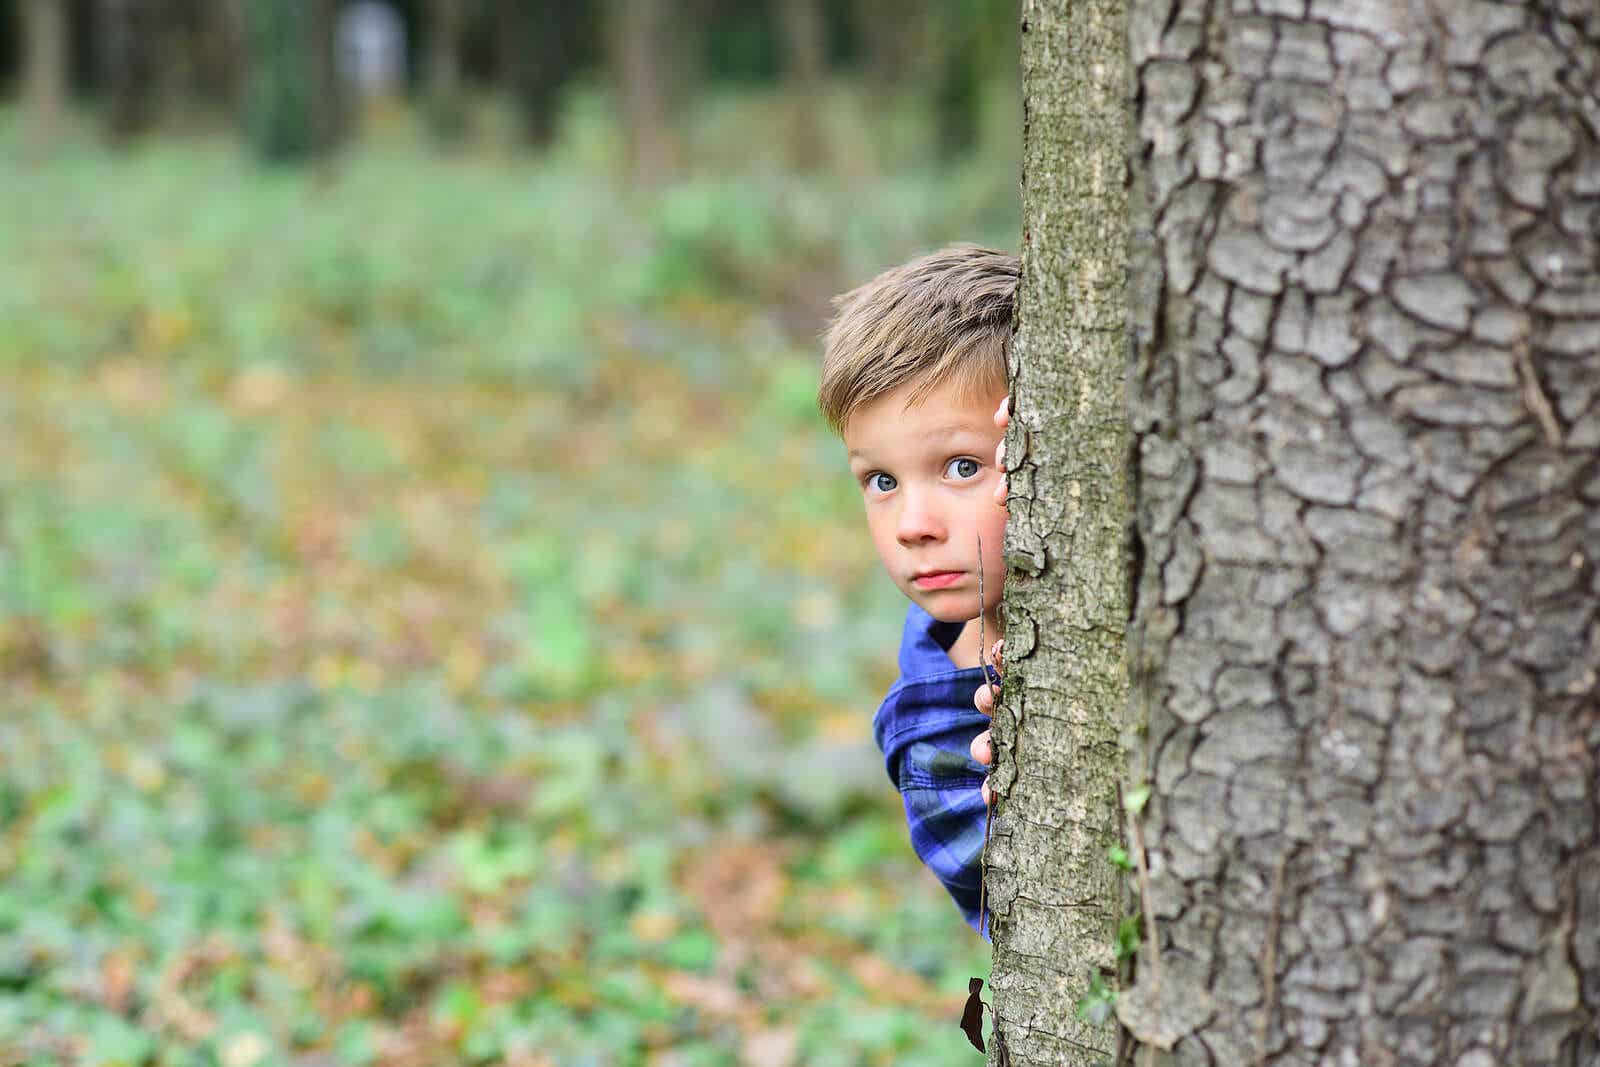 A child hiding behind a tree, looking scared.